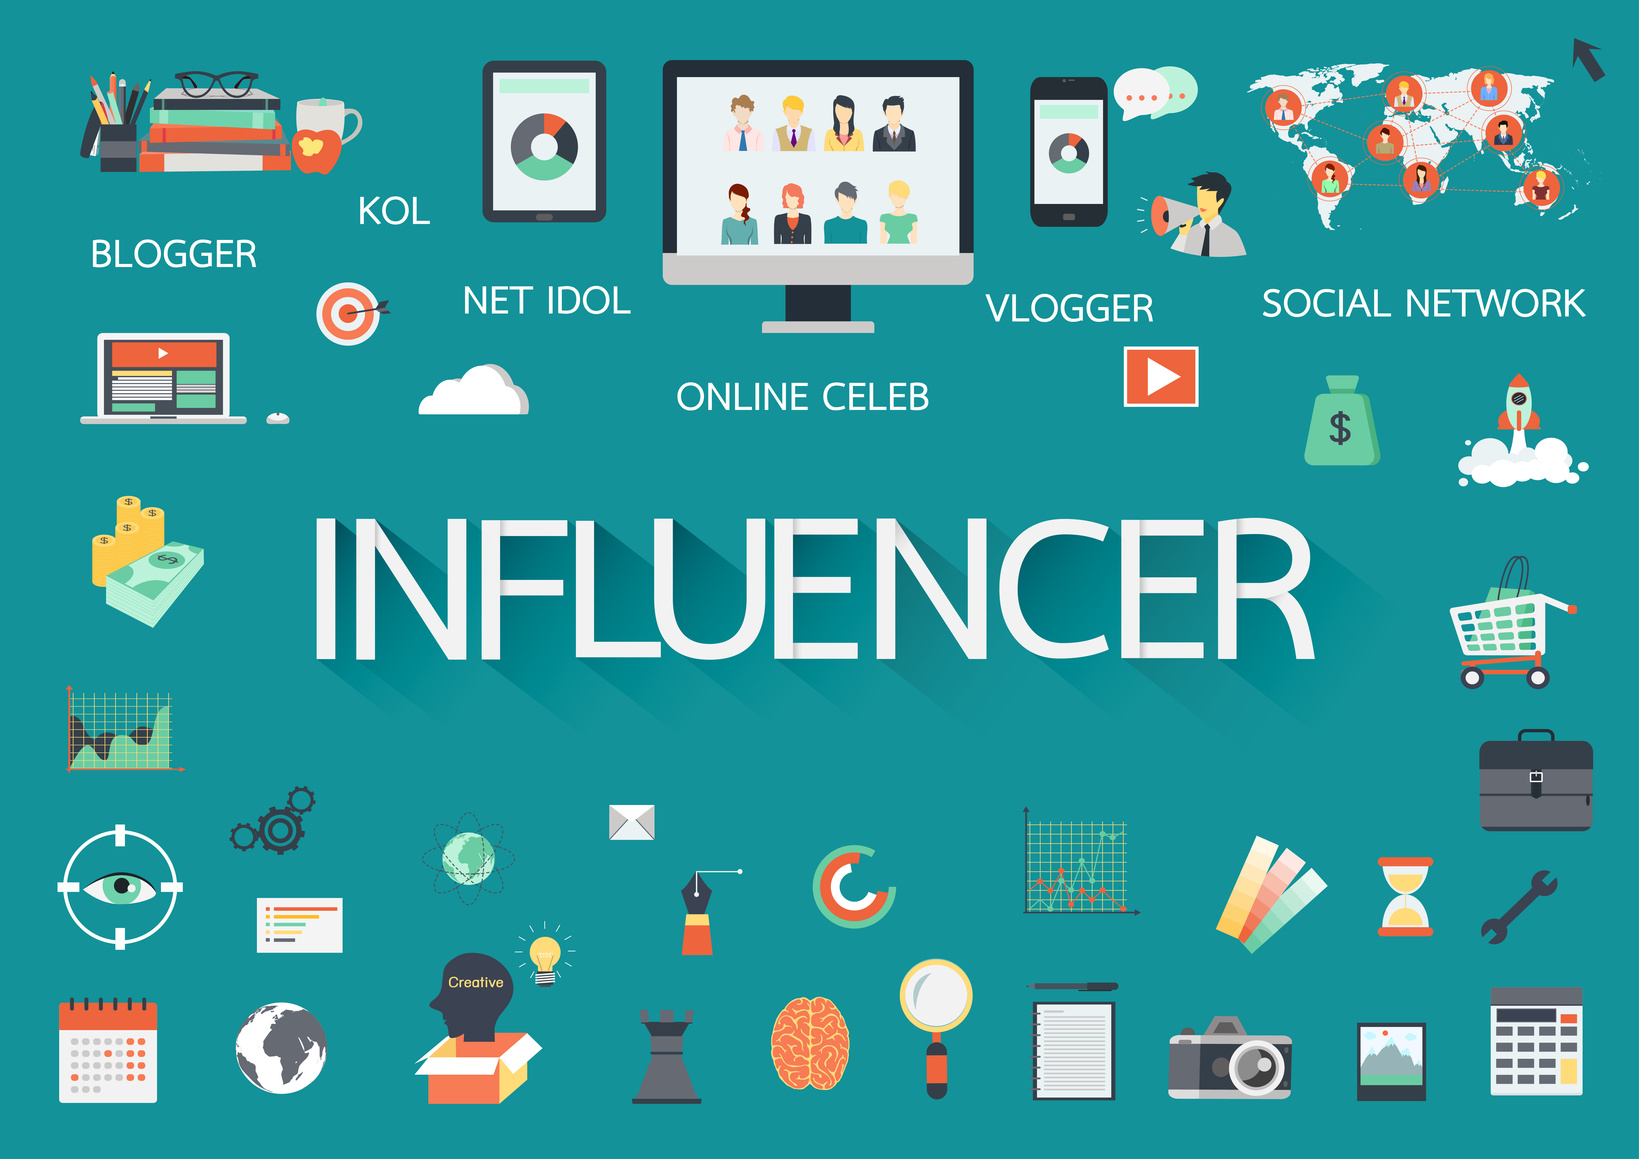 9 Top Social Media Influencers You Need to Follow